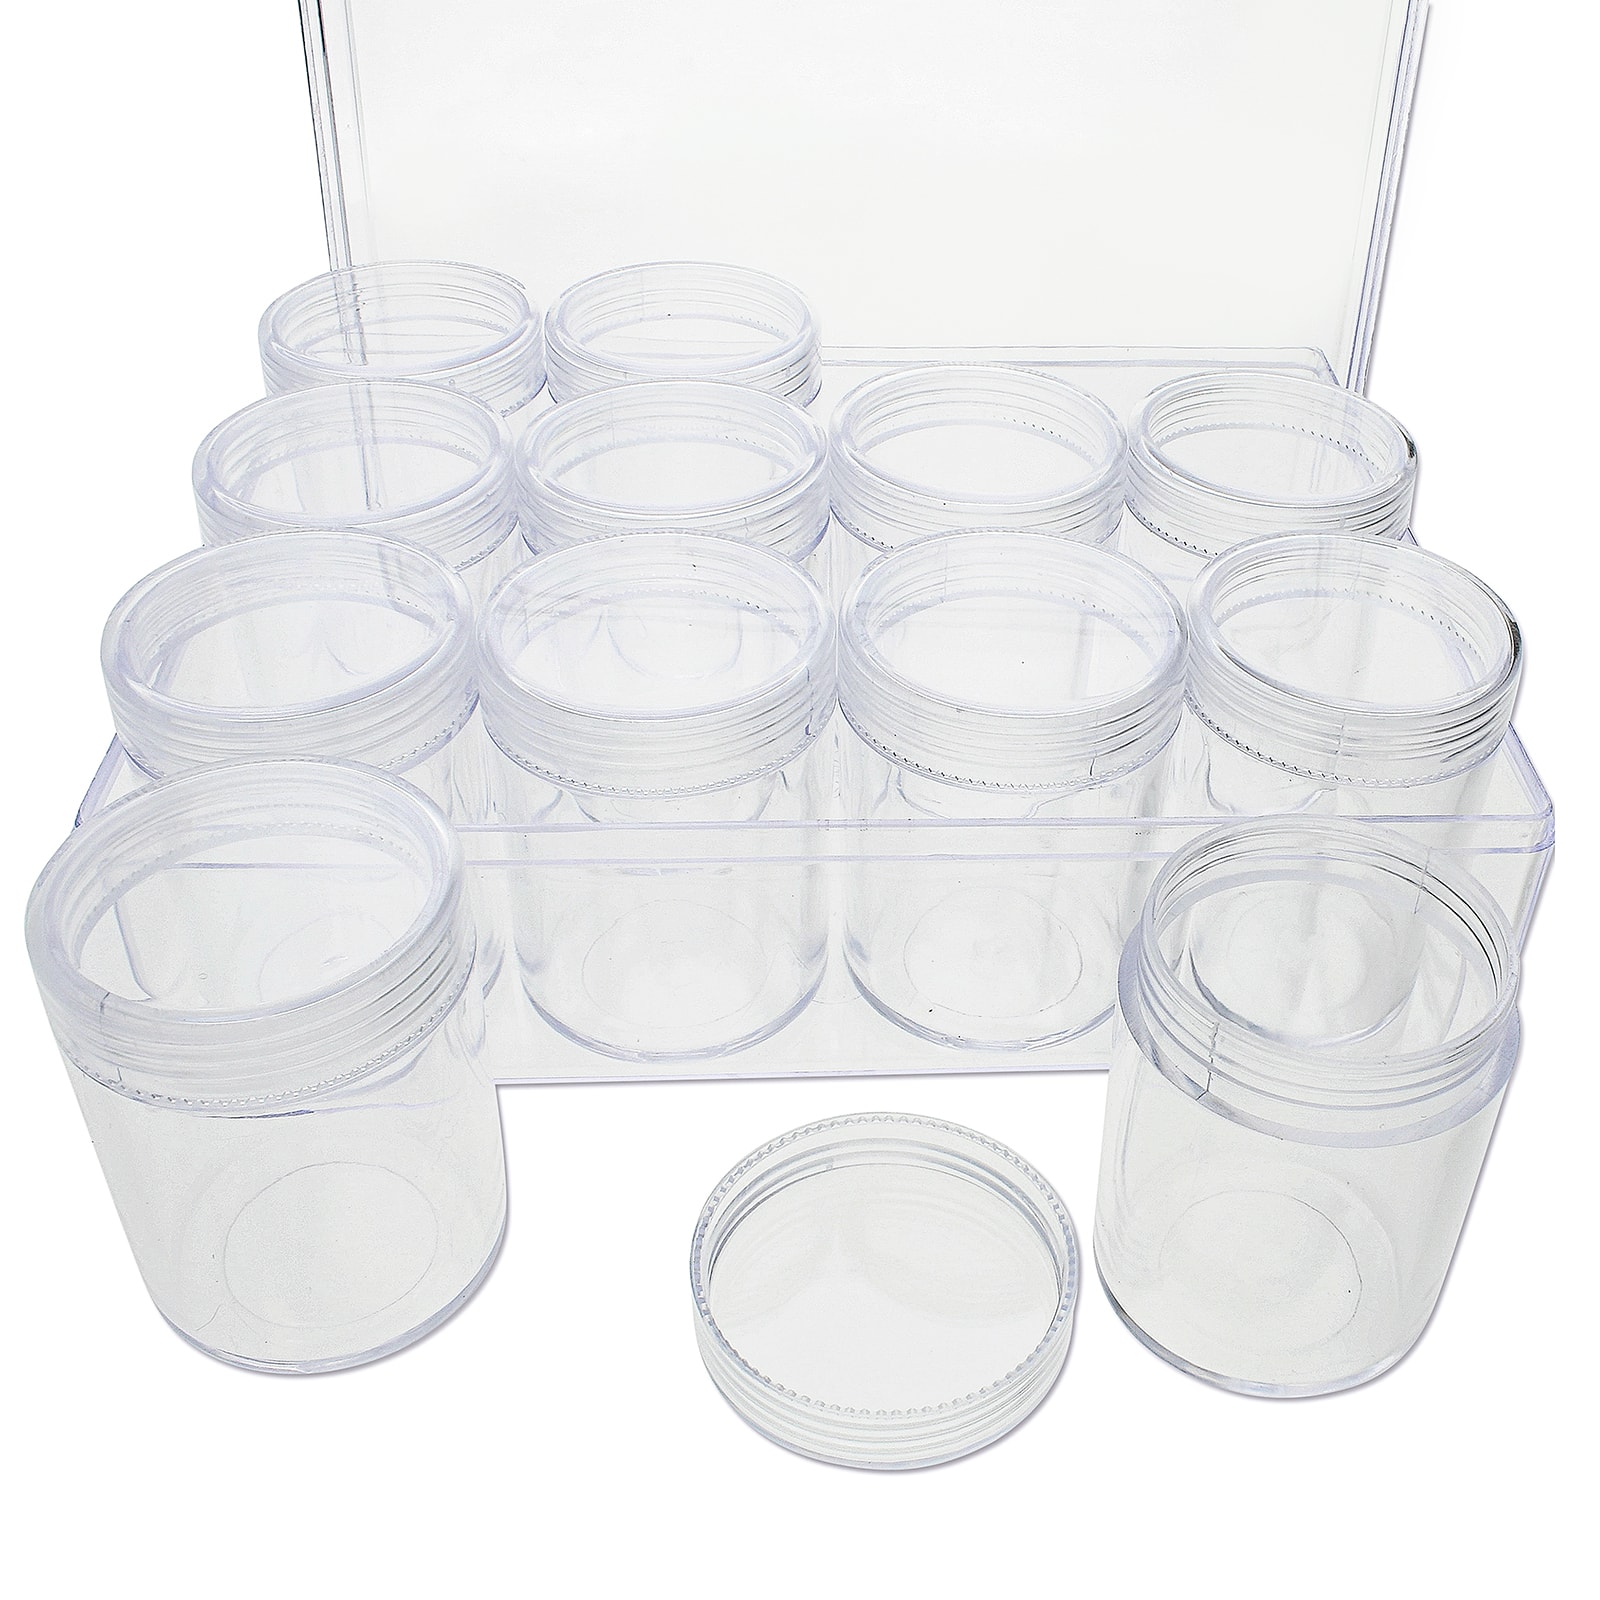 Reusable Small 1.5oz Clear Plastic Containers with Lids Favor Storage